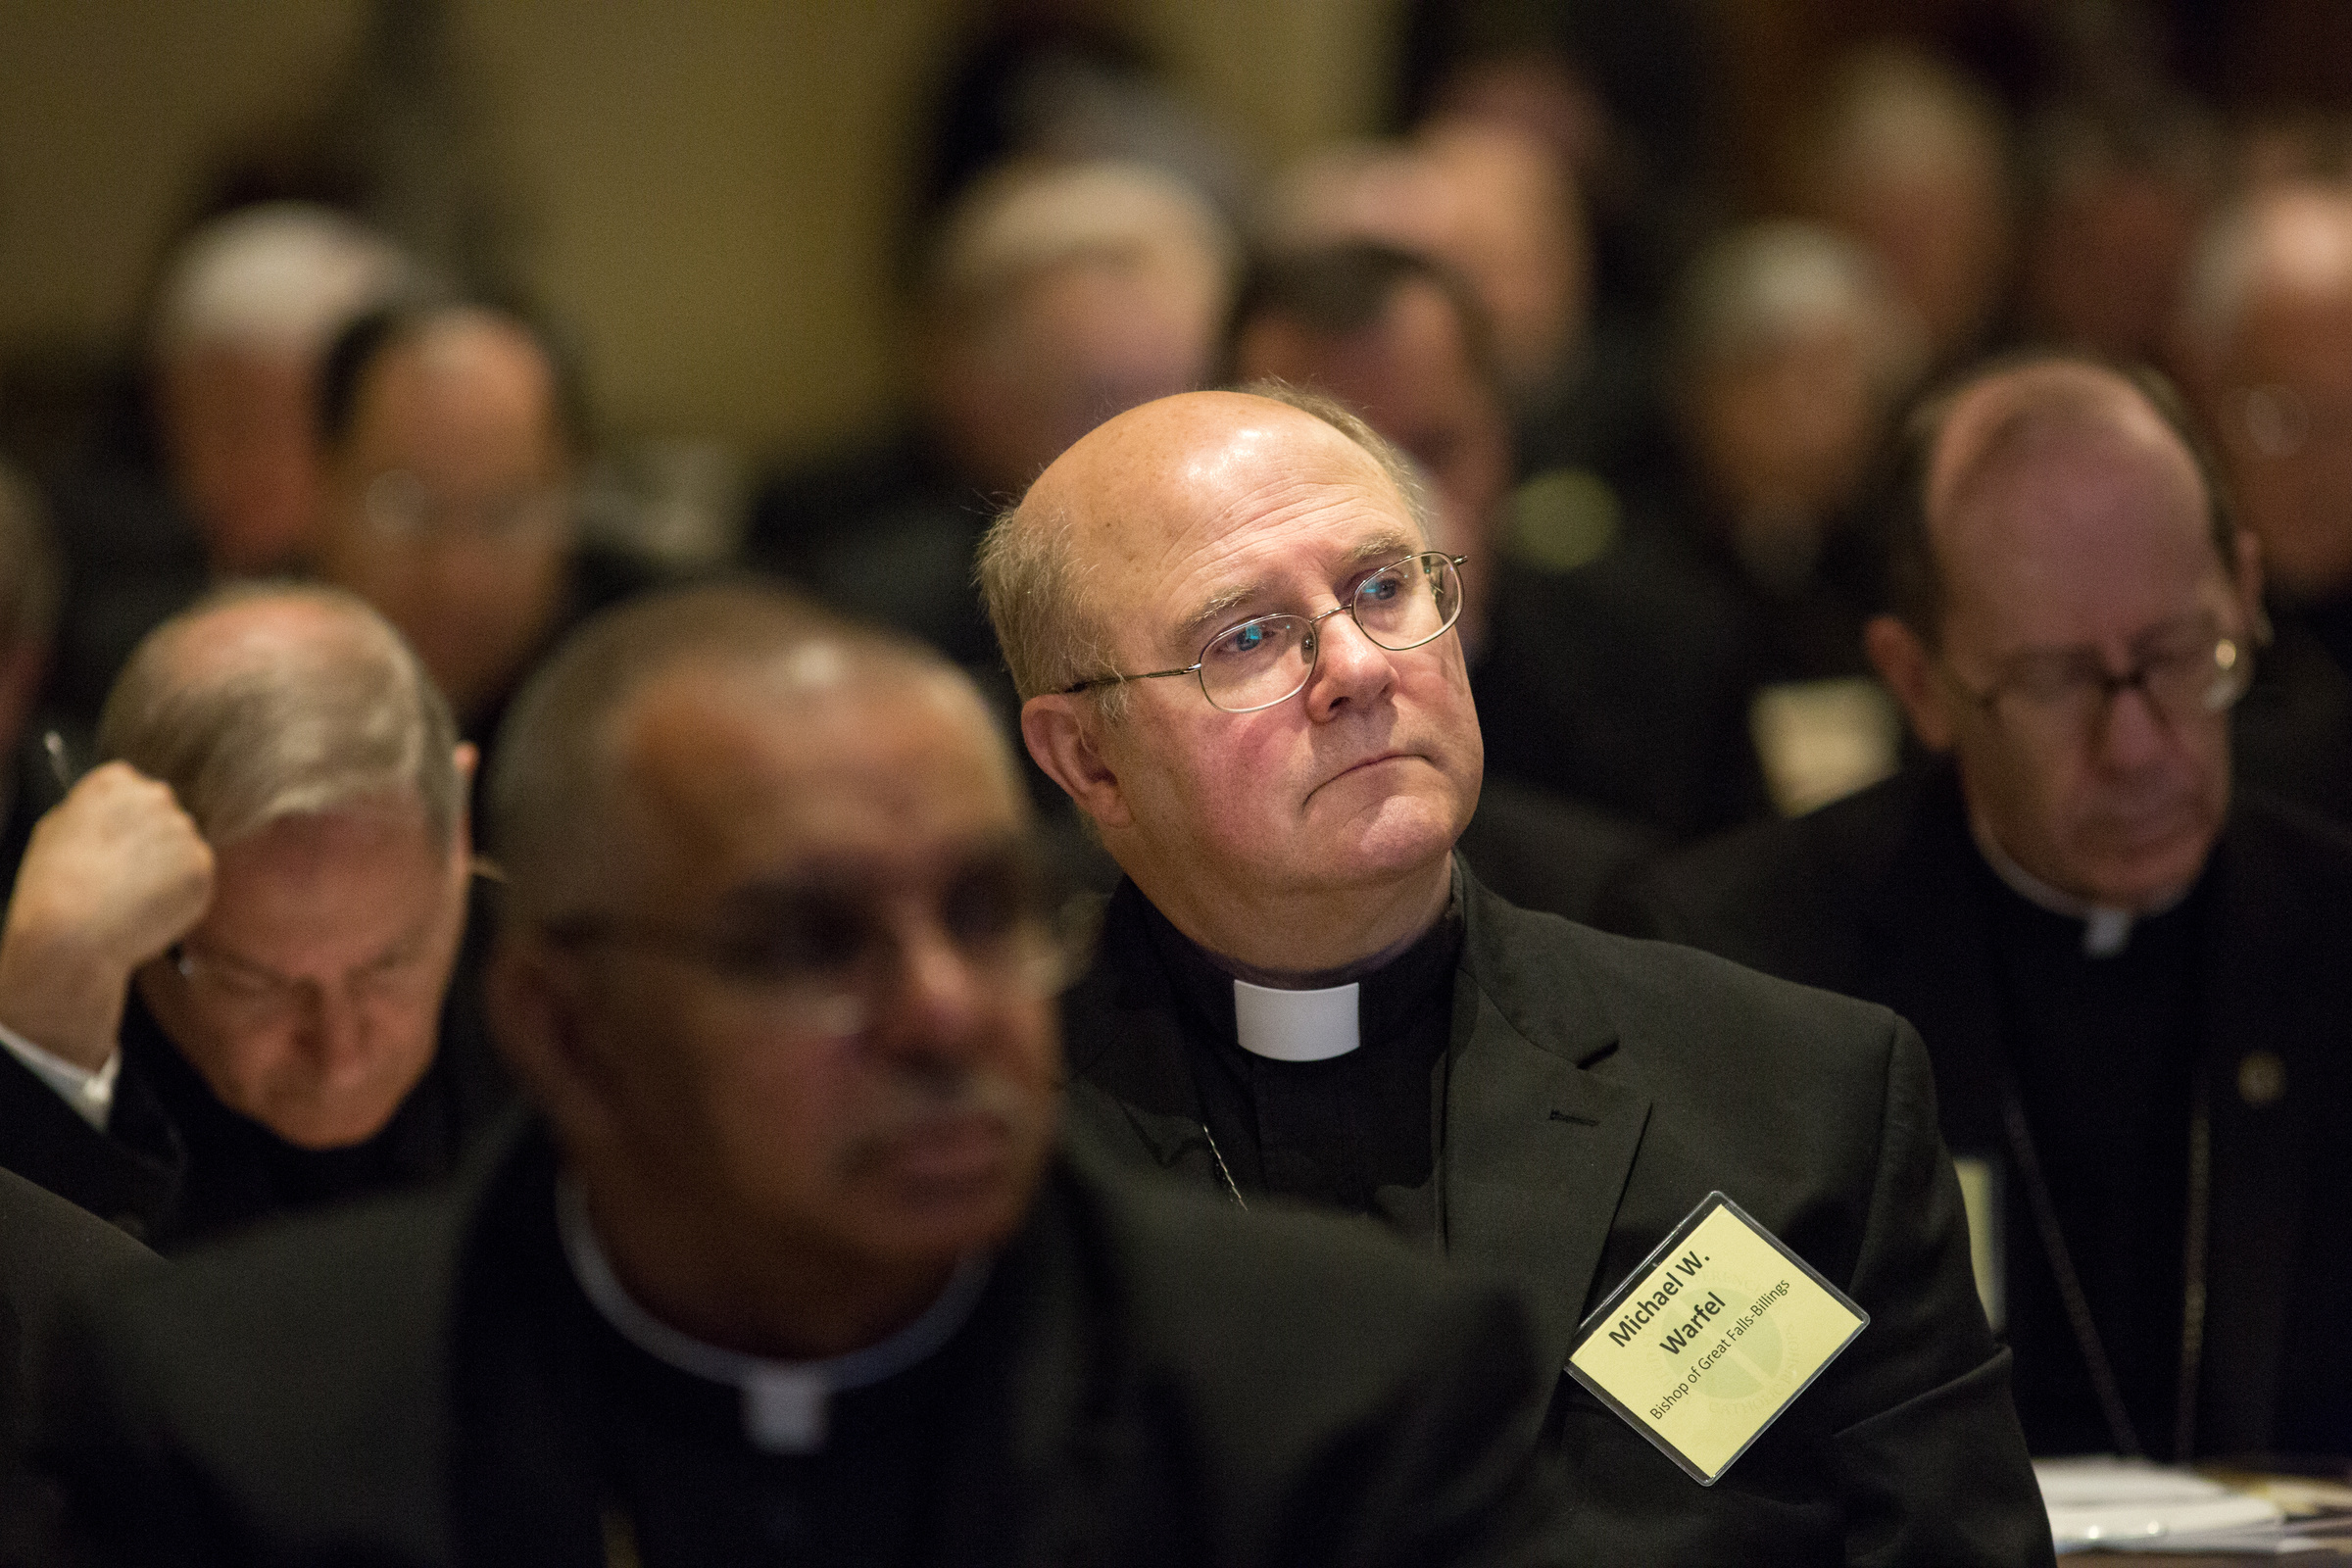 Bishop Michael Warfel of Great Falls-Billings, Mont., listens to speeches Wednesday during the annual spring general assembly of the U.S. Conference of Catholic Bishops in St. Louis. (CNS/St. Louis Review/Lisa Johnston)